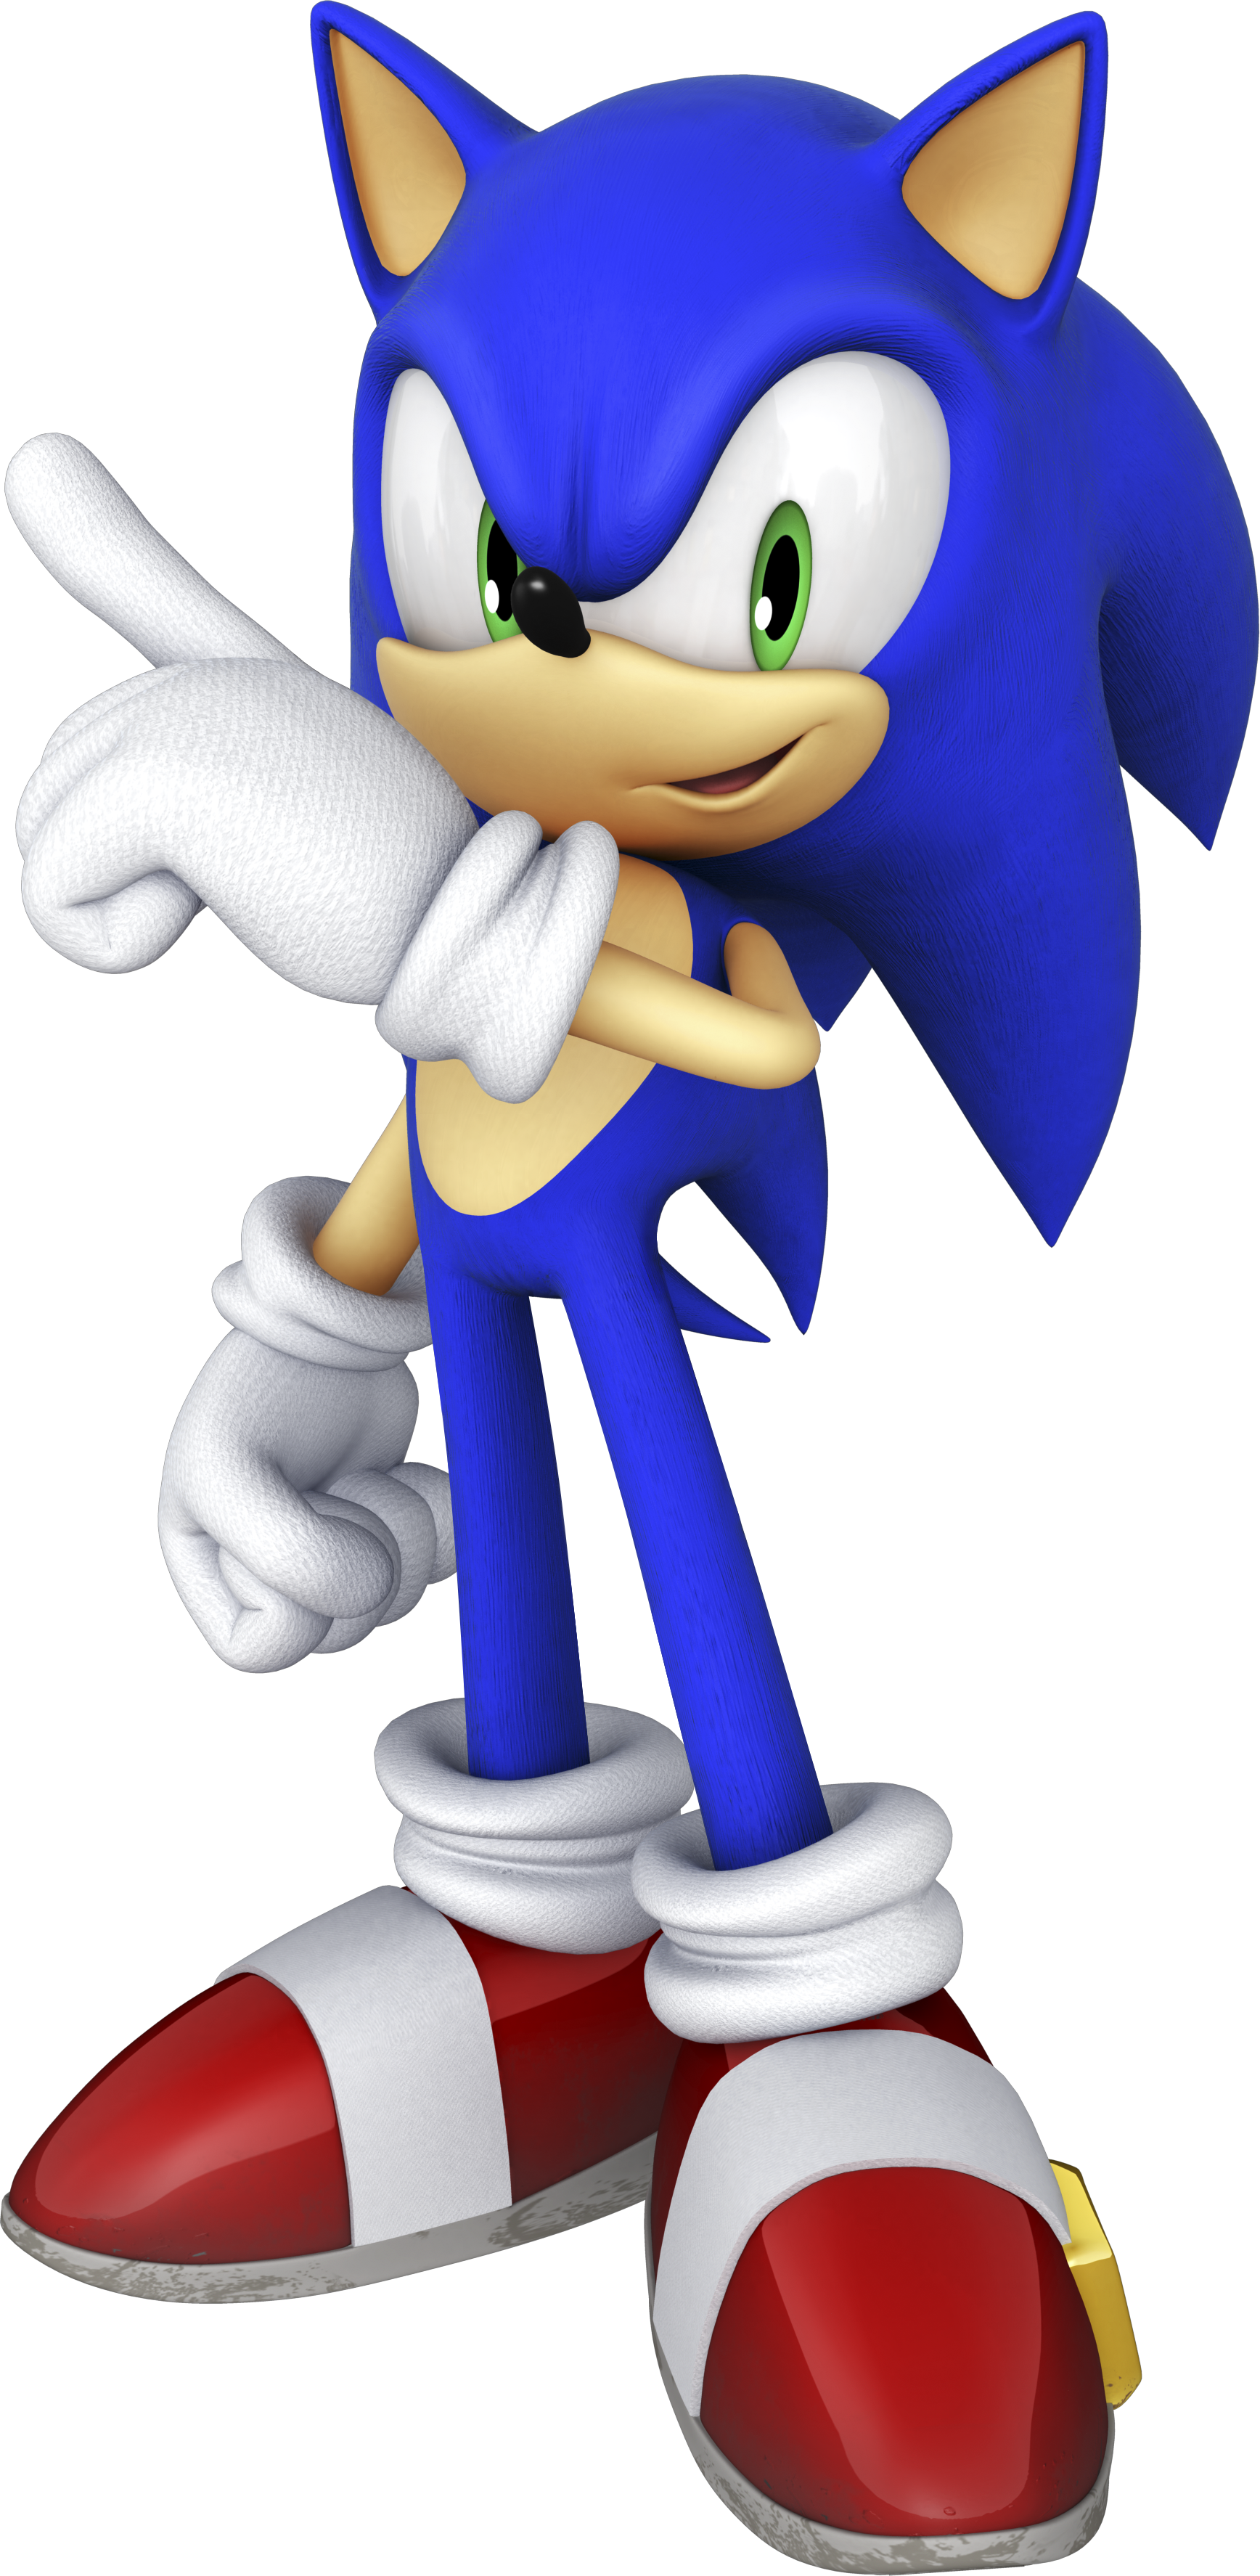 Sonic The Hedgehog.png - Sonic The Hedgehog, Transparent background PNG HD thumbnail